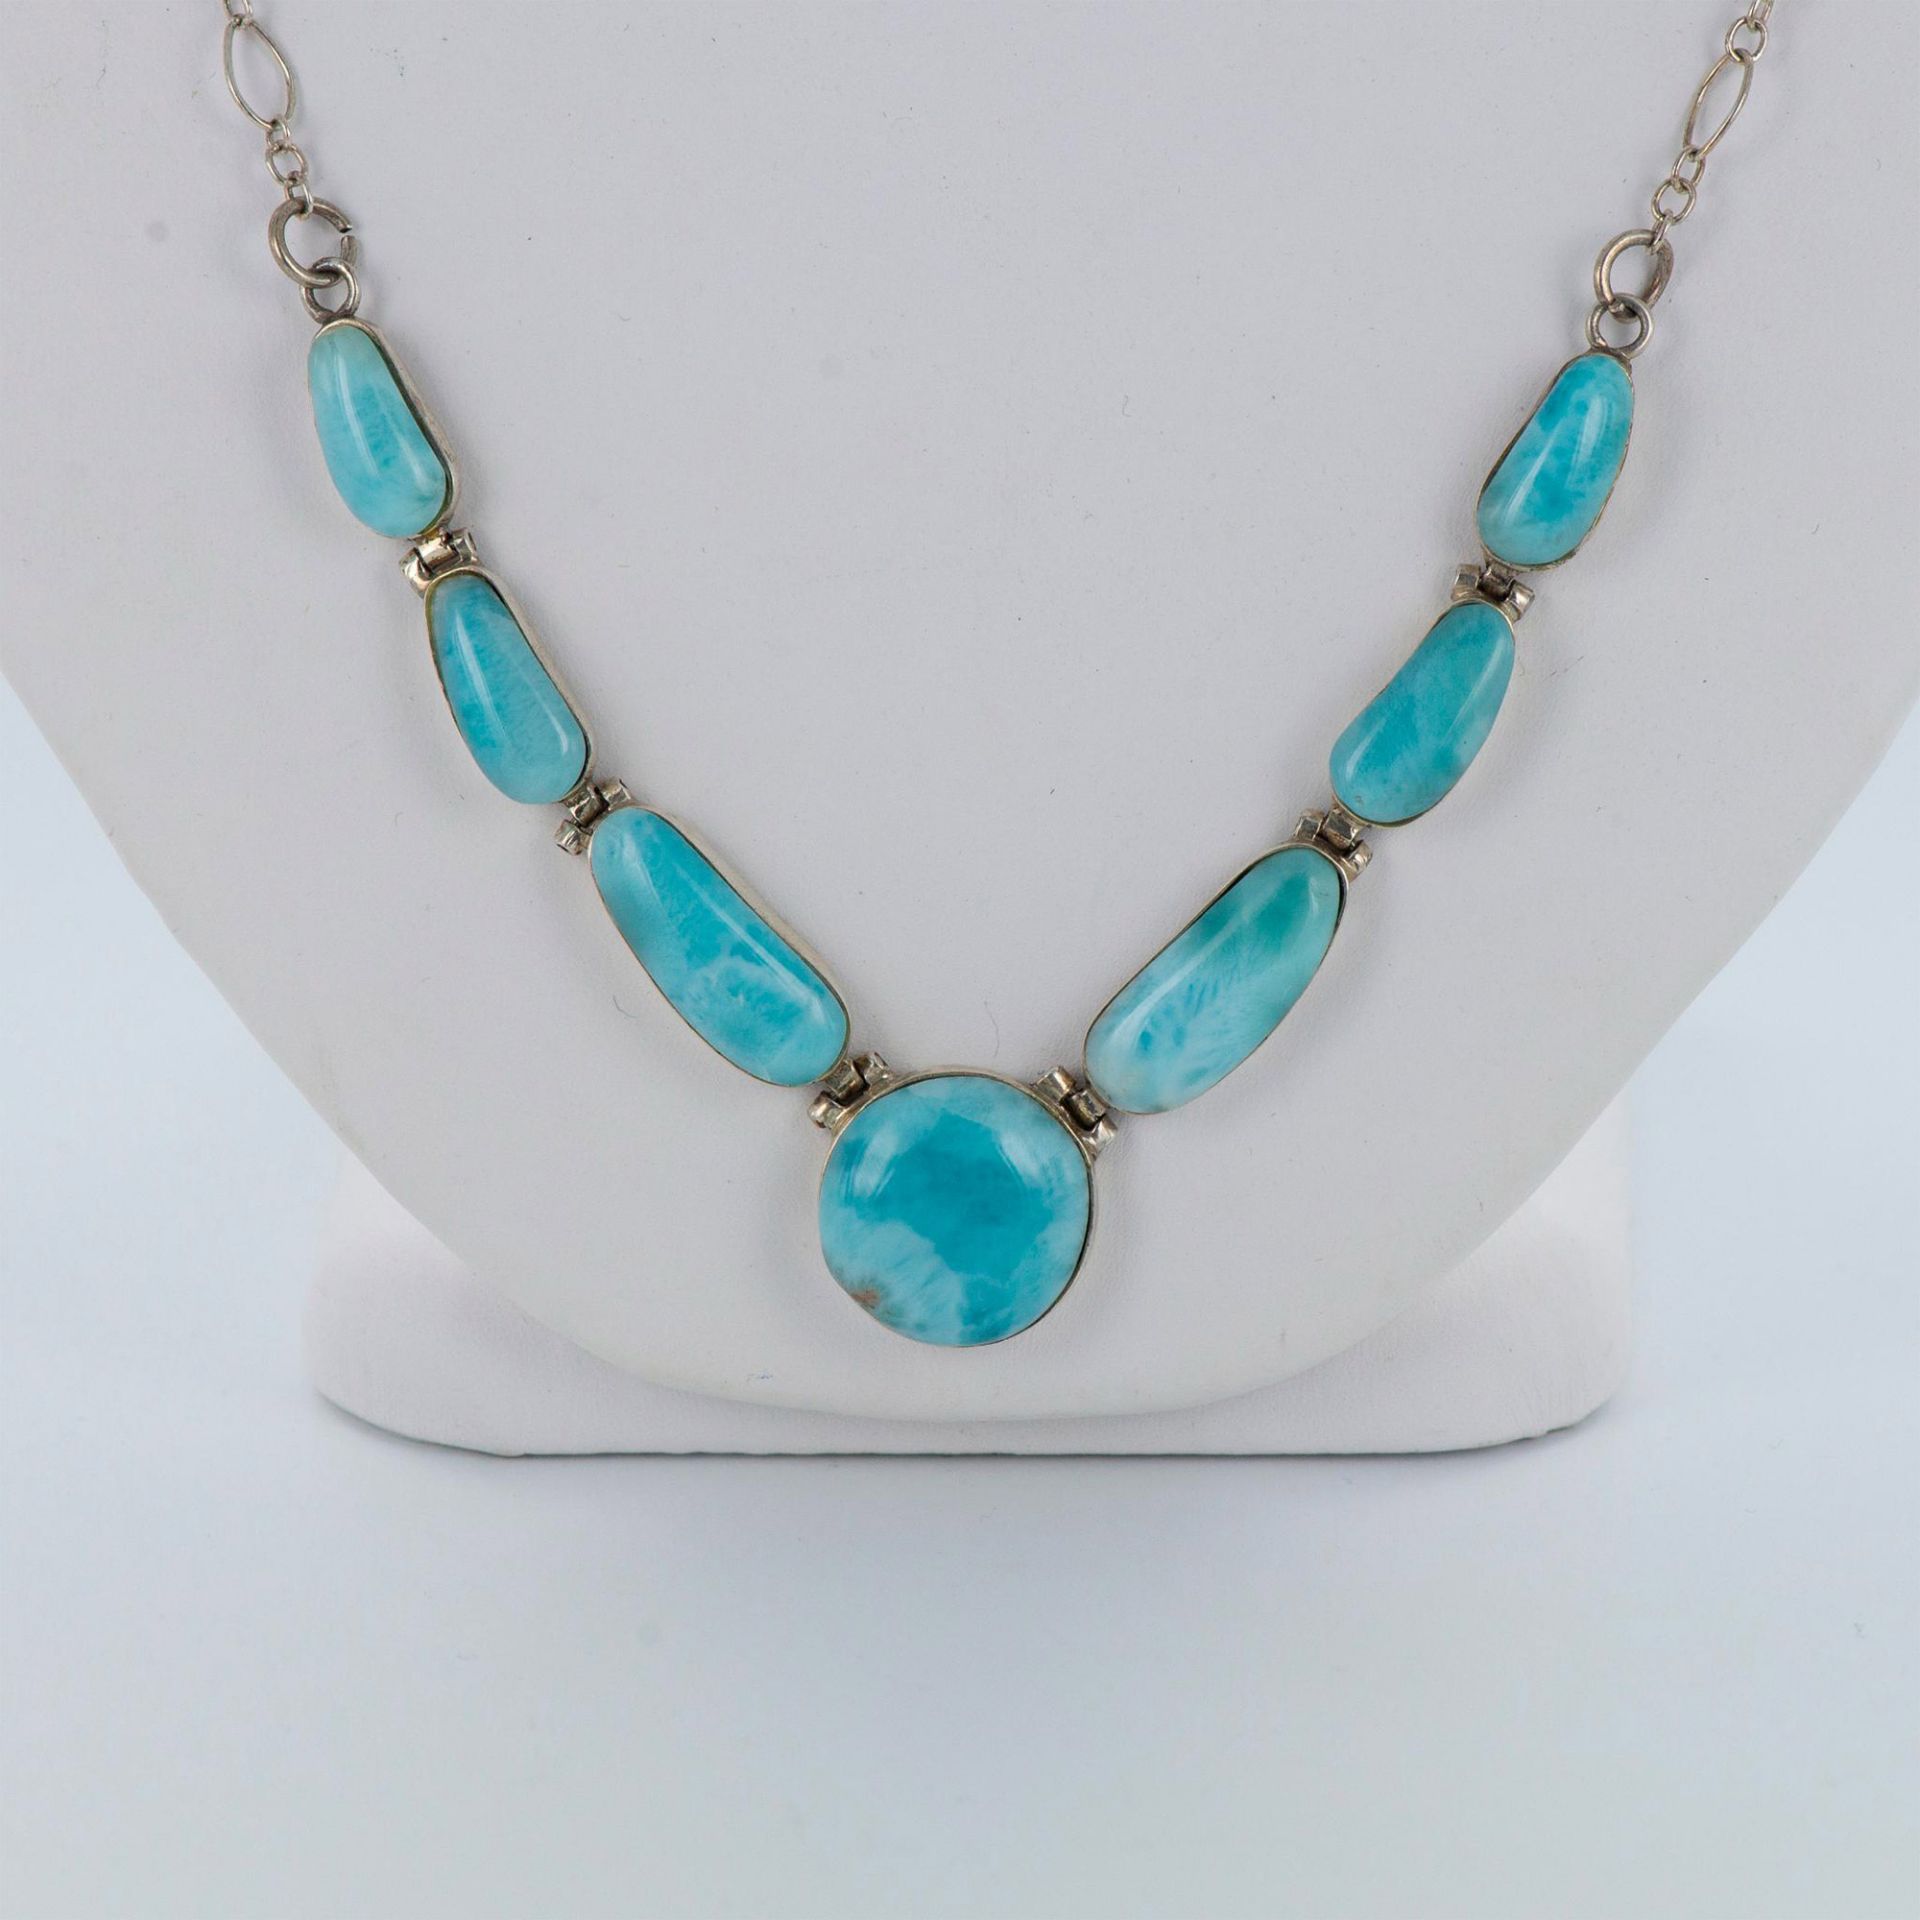 Larimar and Sterling Silver Necklace - Image 2 of 4